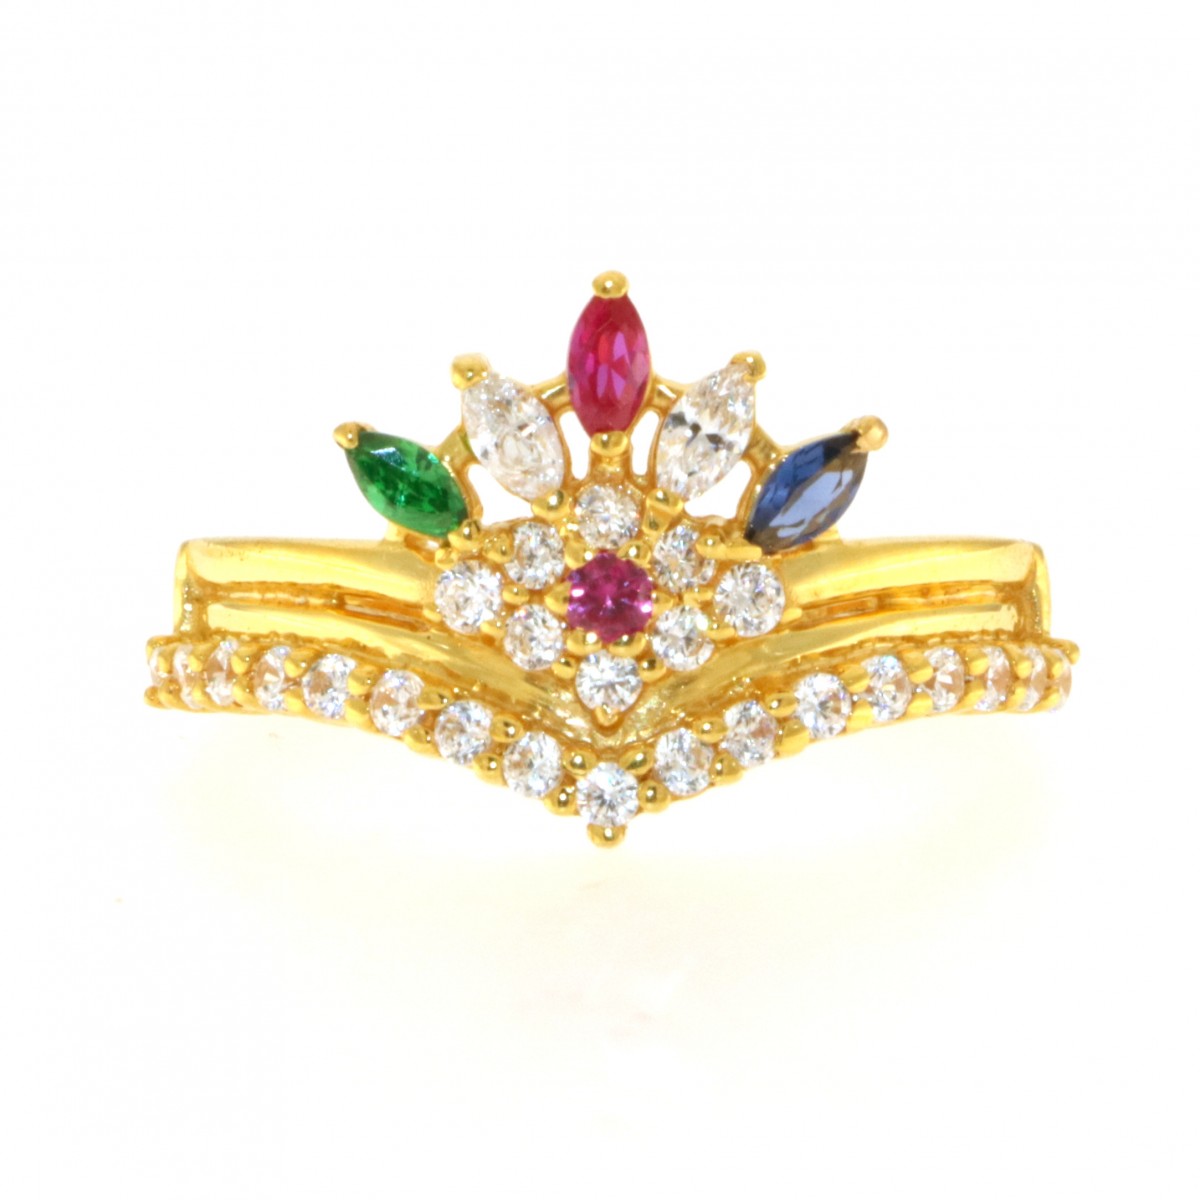 22ct Real Gold Asian/Indian/Pakistani Style Crown Ring